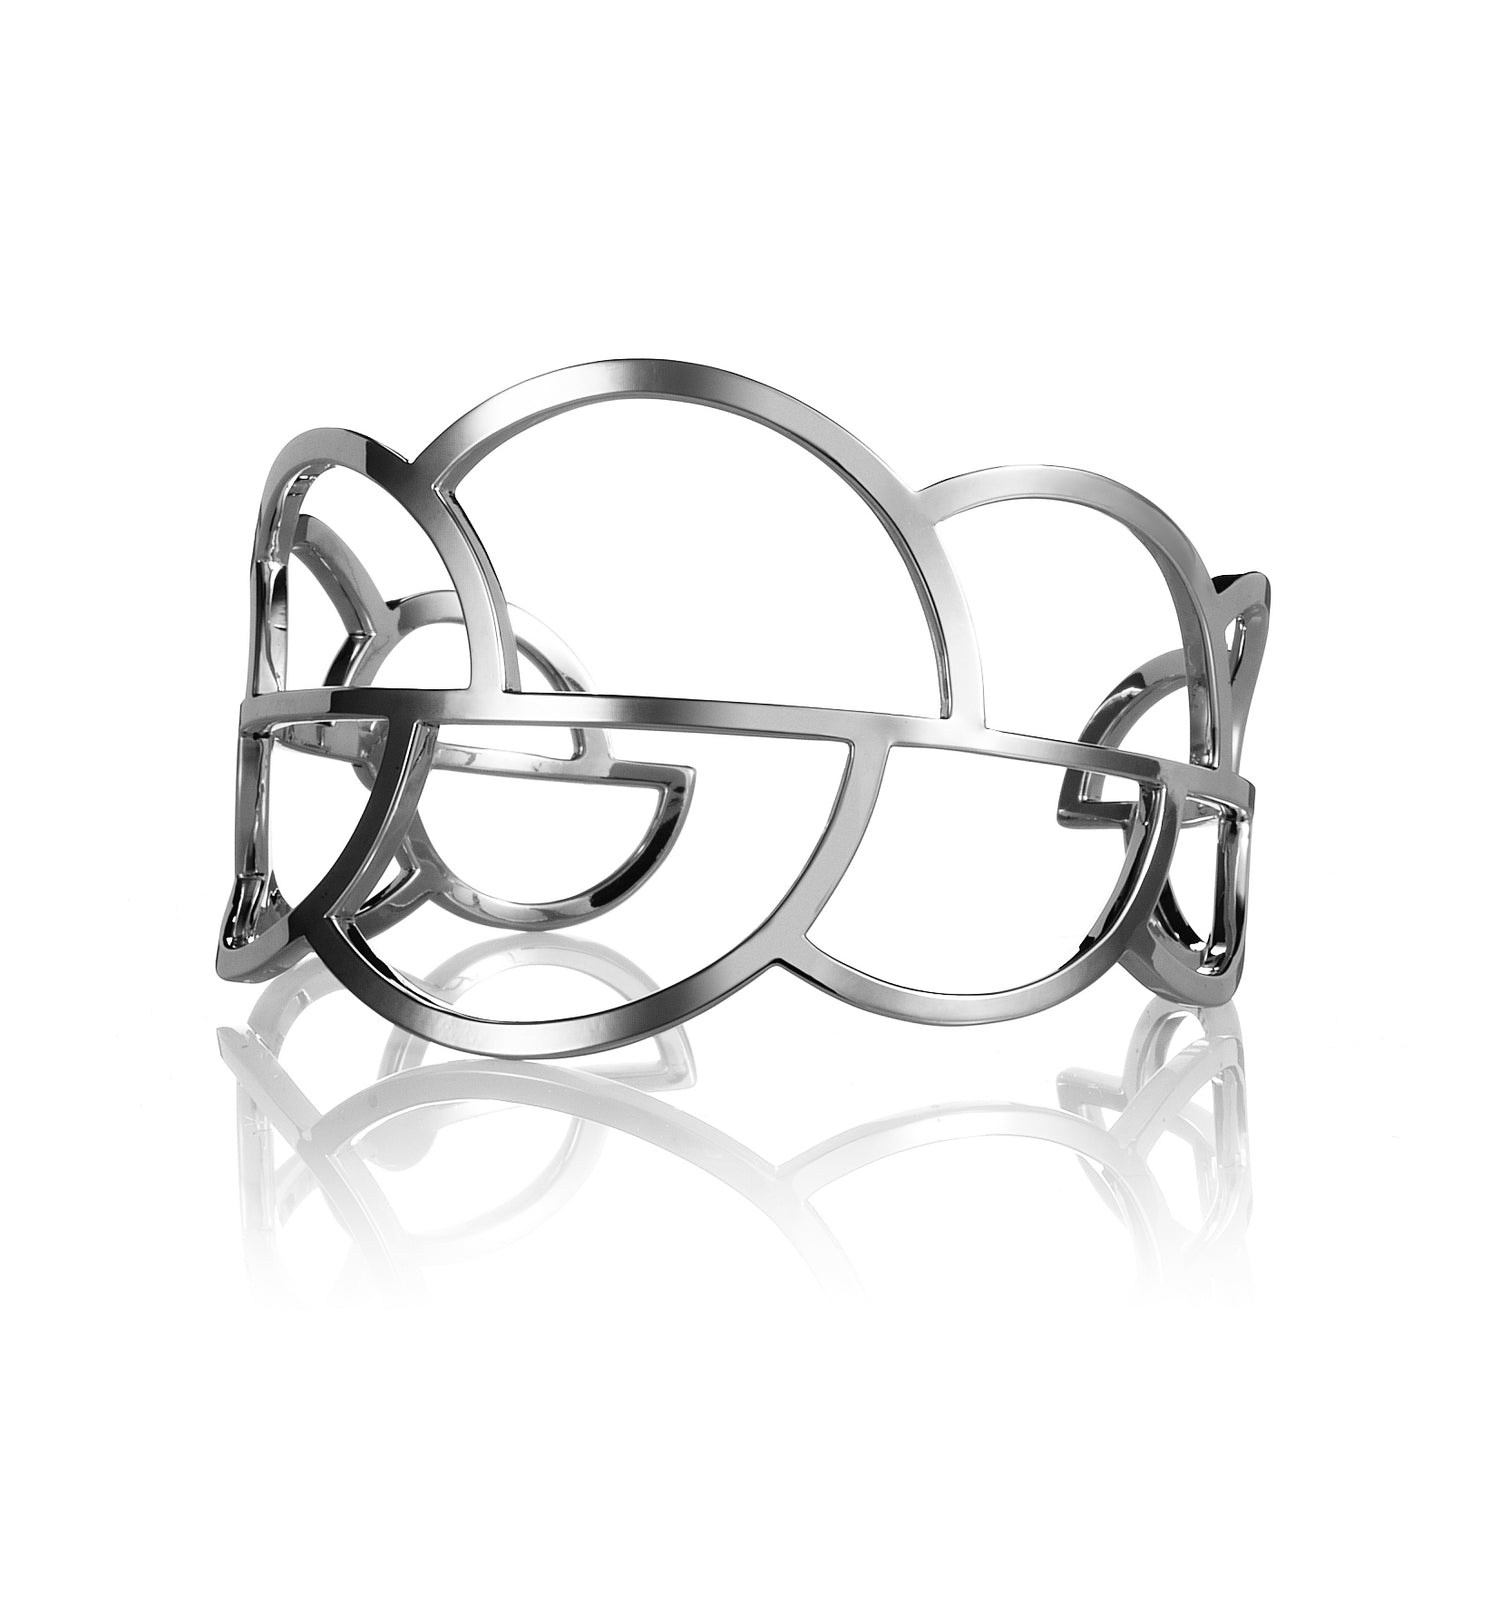 Classy yet edgy cuff bracelet from Drift collection. This design represents deconstructed circles and is inspired by the imperfection of life.  Material: 925 silver.  Size: adjustable, fits any wrist.